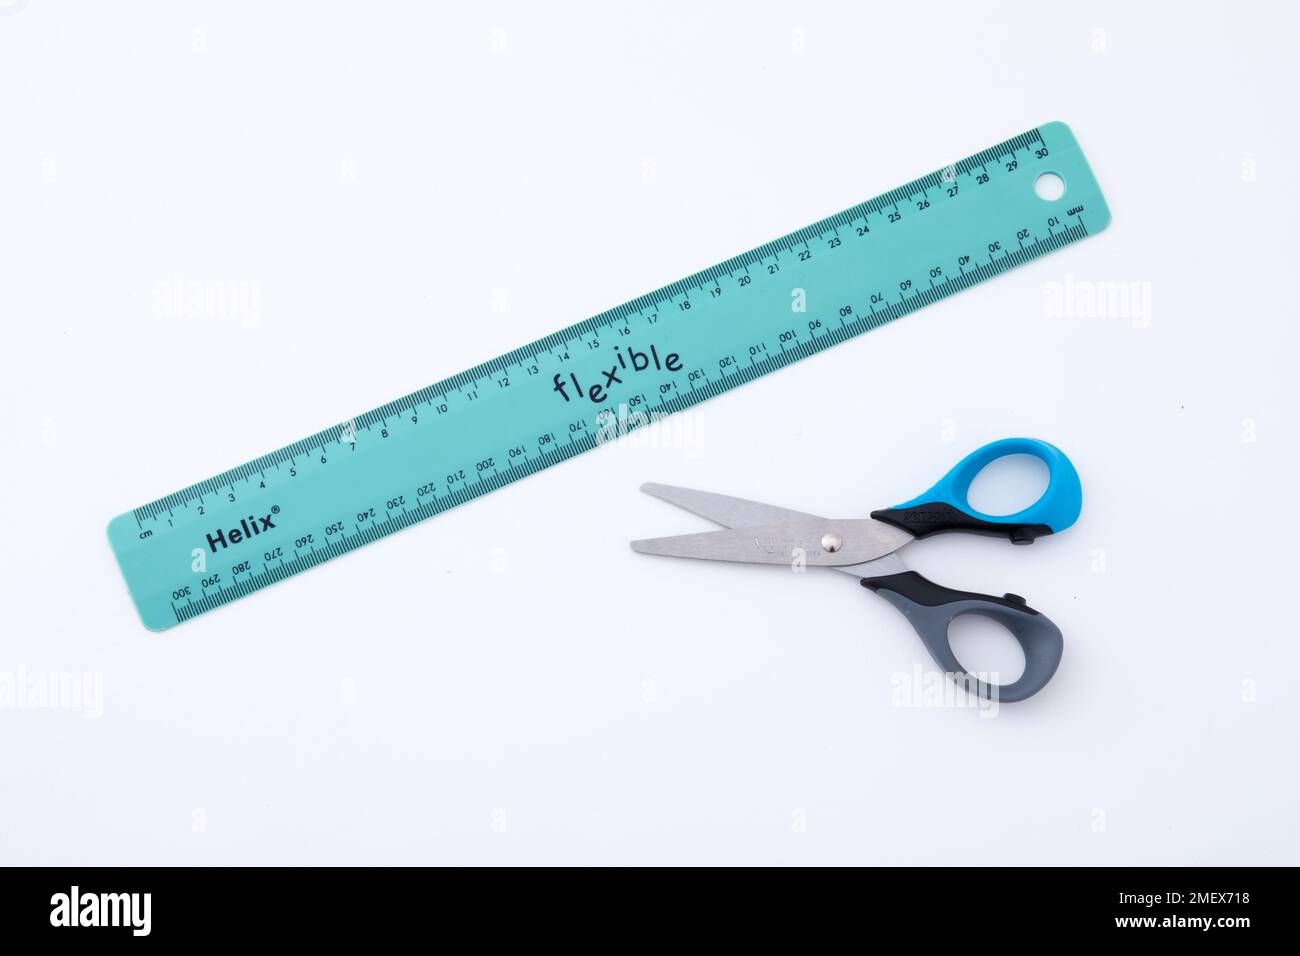 You will need equipment for Pinata project - Ruler and scissors Stock Photo